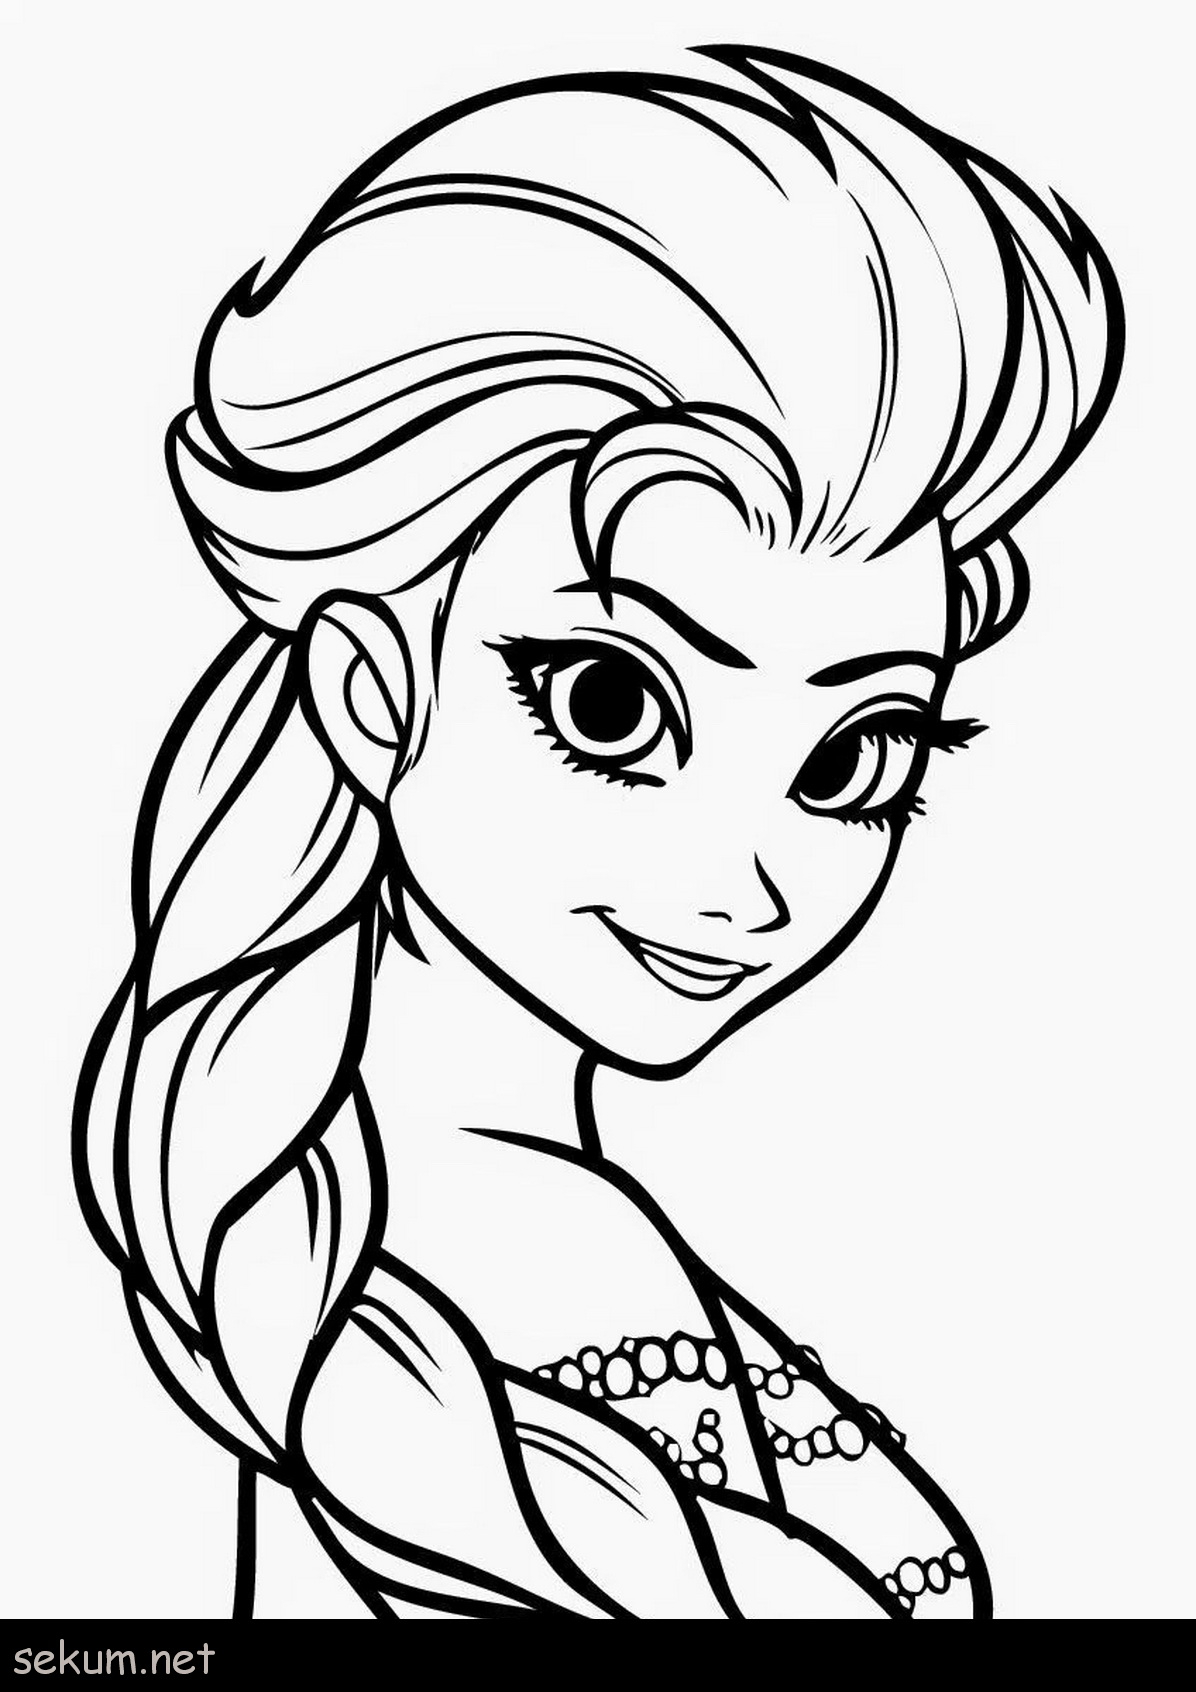 Coloring Pages For Girls Frozen Coloring Pages Stunning Elsa Frozen Coloring Pages Pdf Image